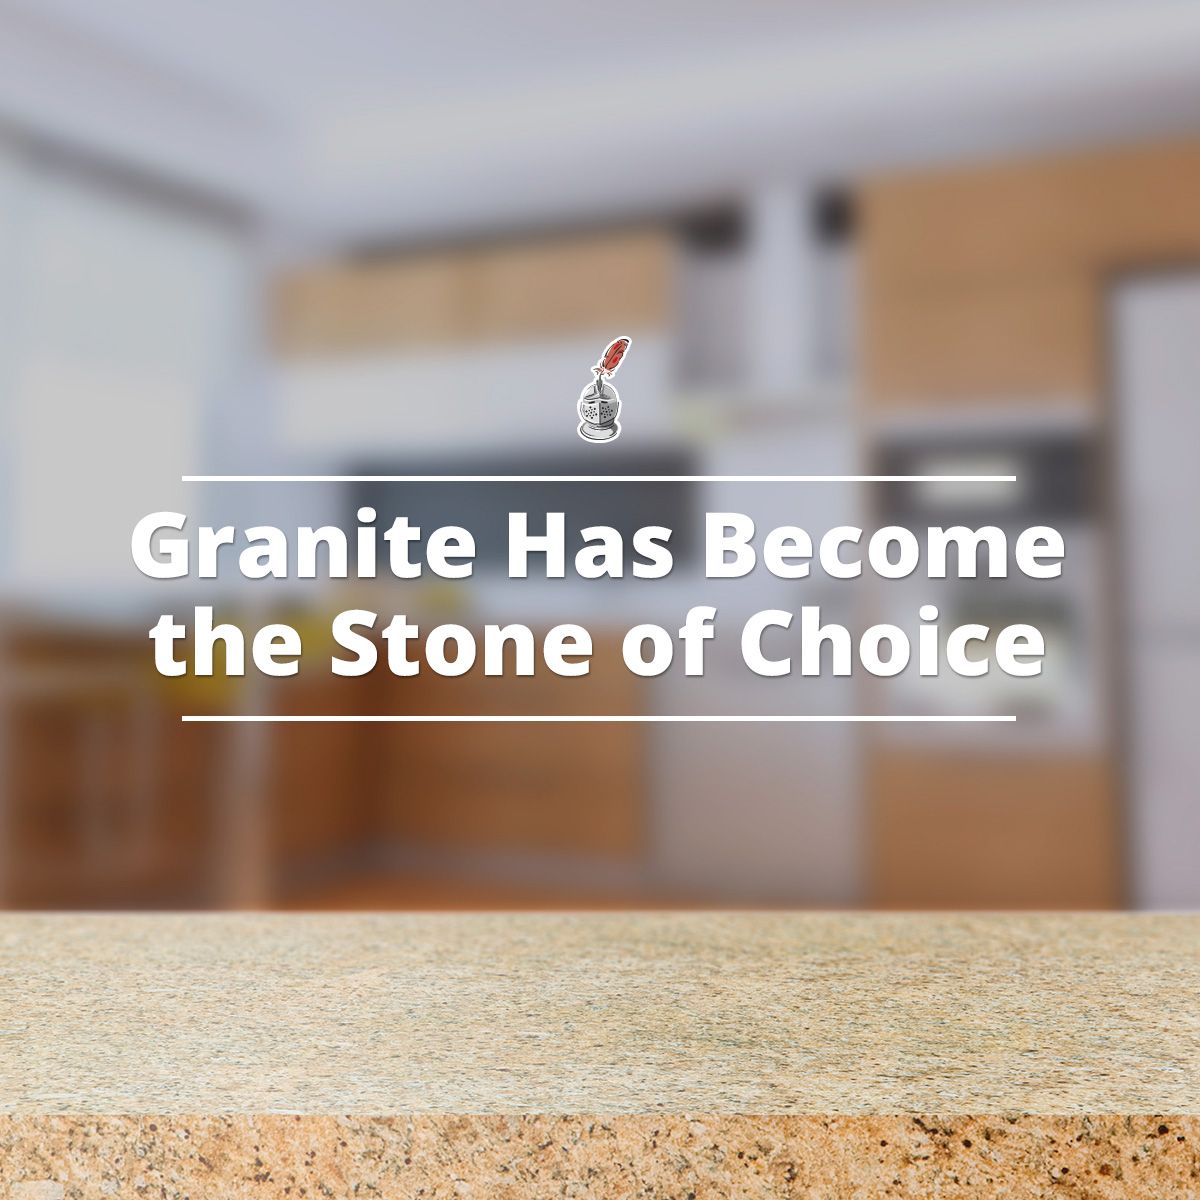 Granite Has Become the Stone of Choice